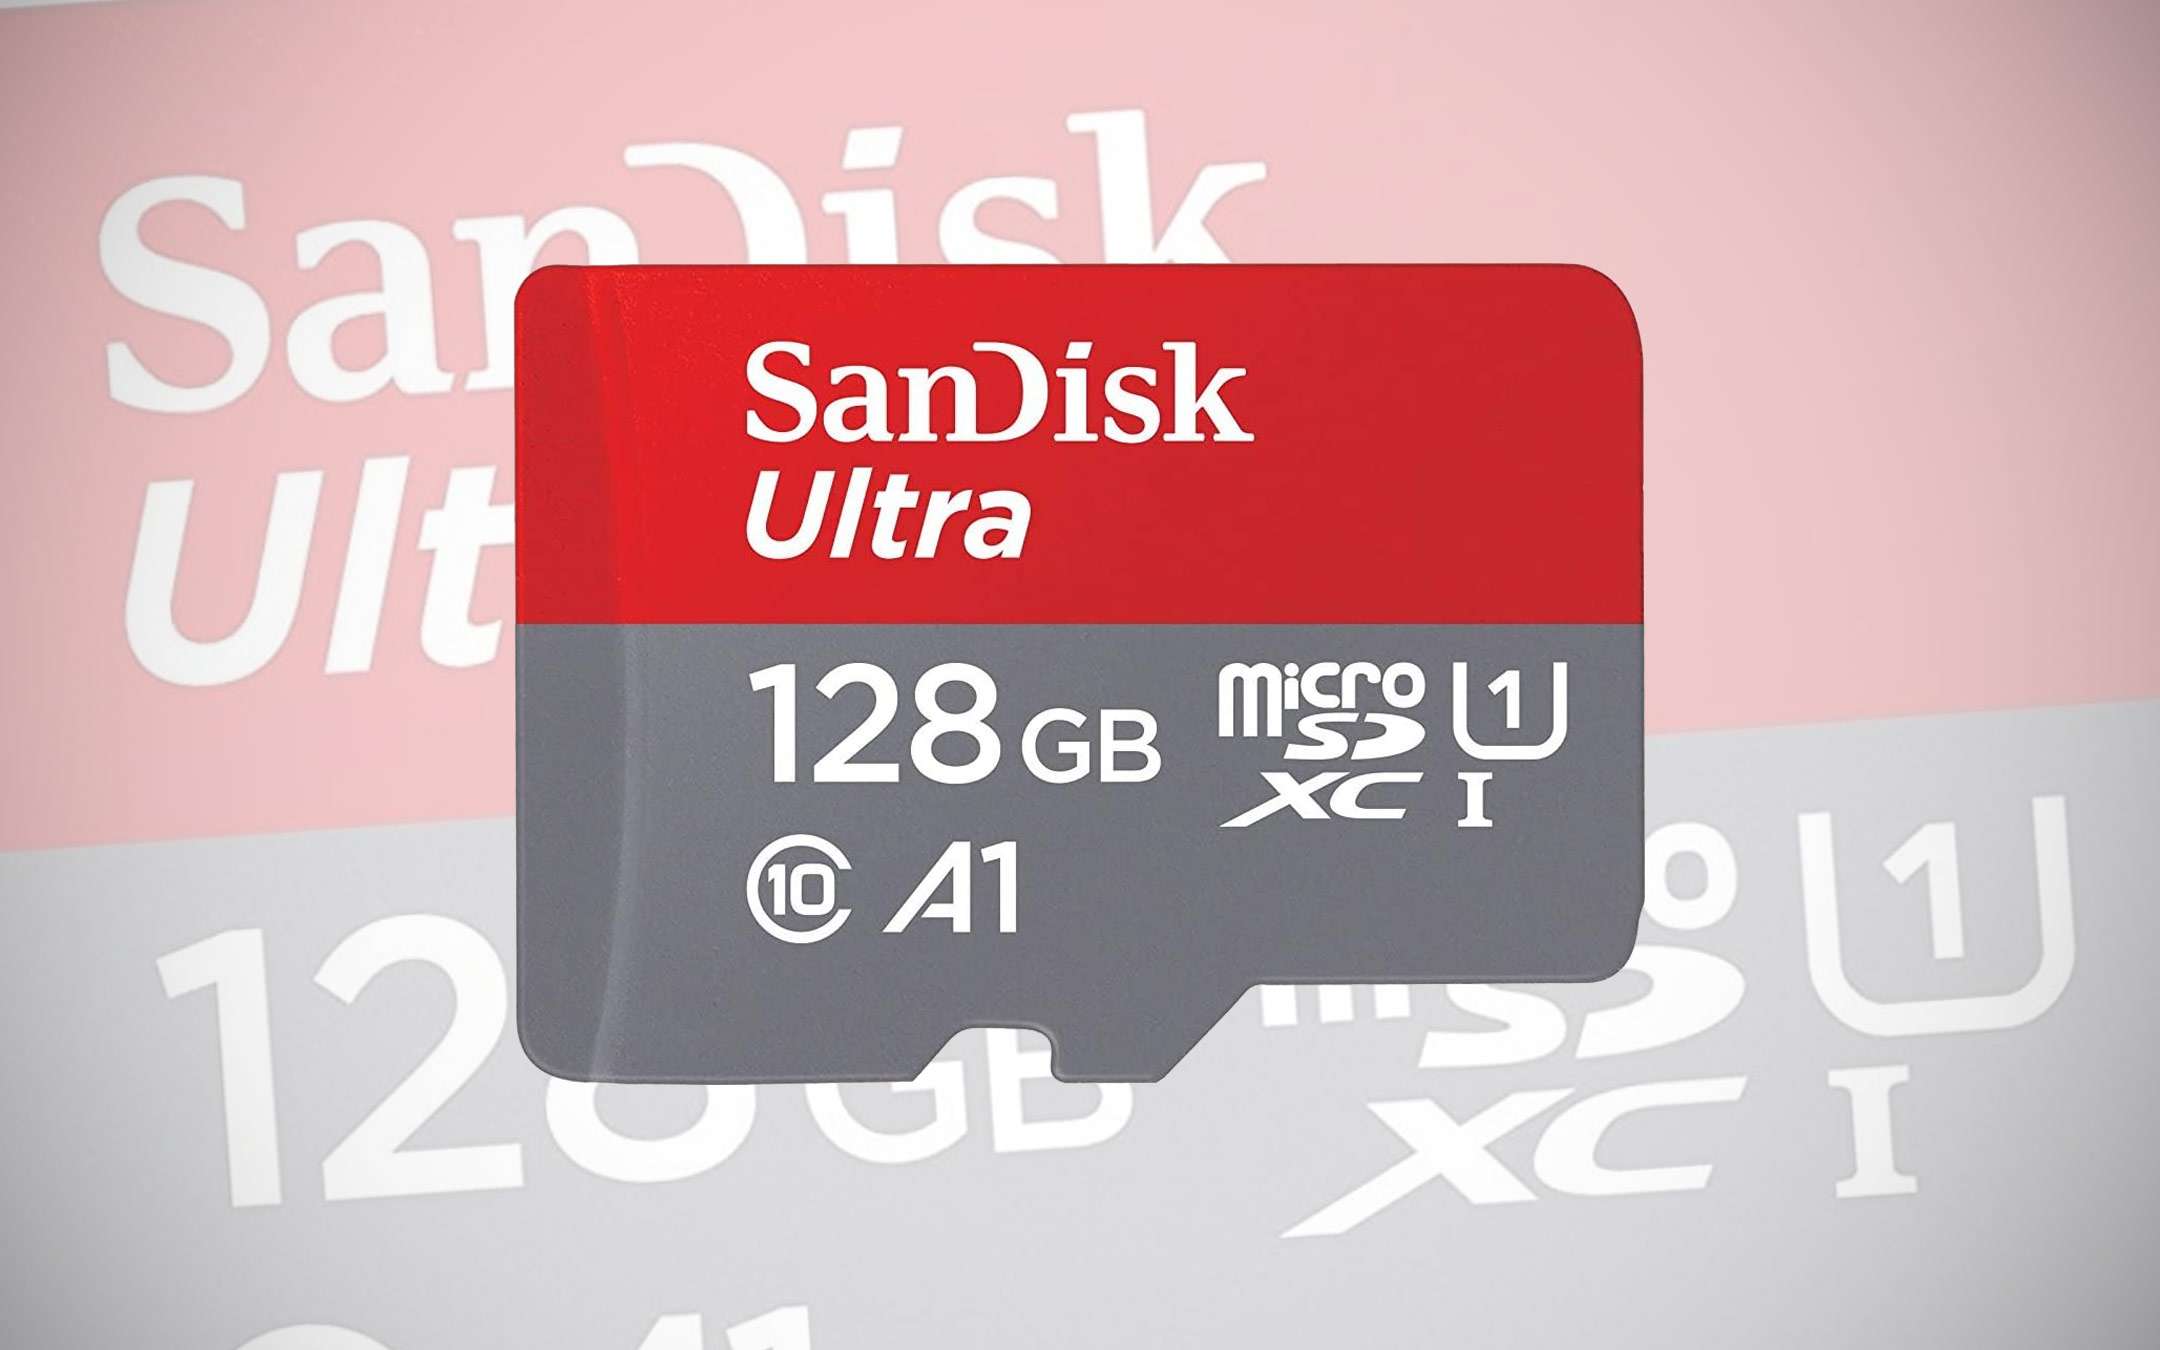 62% discount for the 128 GB SanDisk microSD